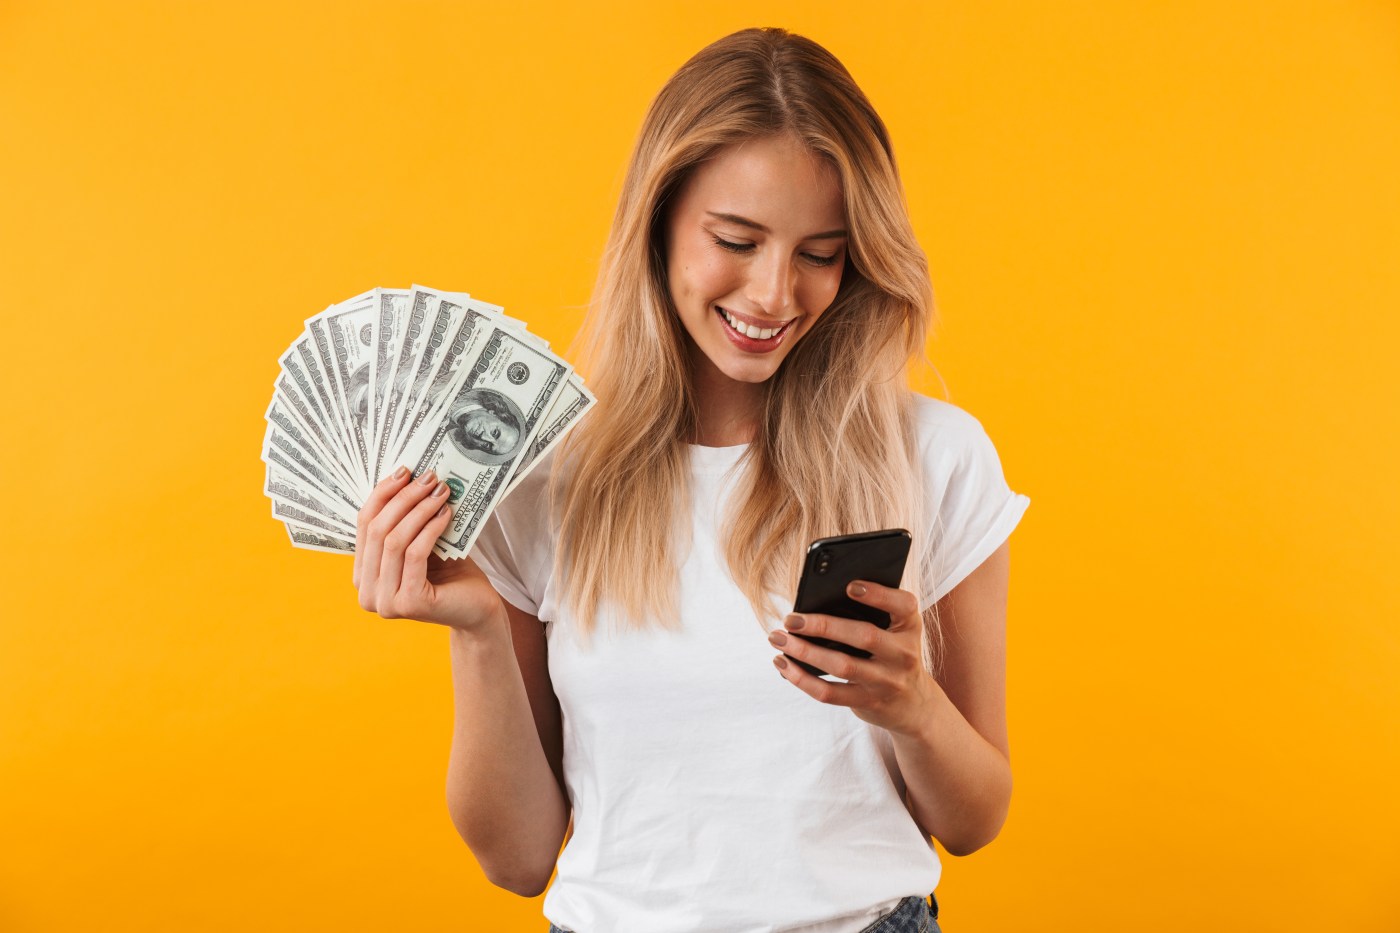 Young woman holding money and looking at her phone